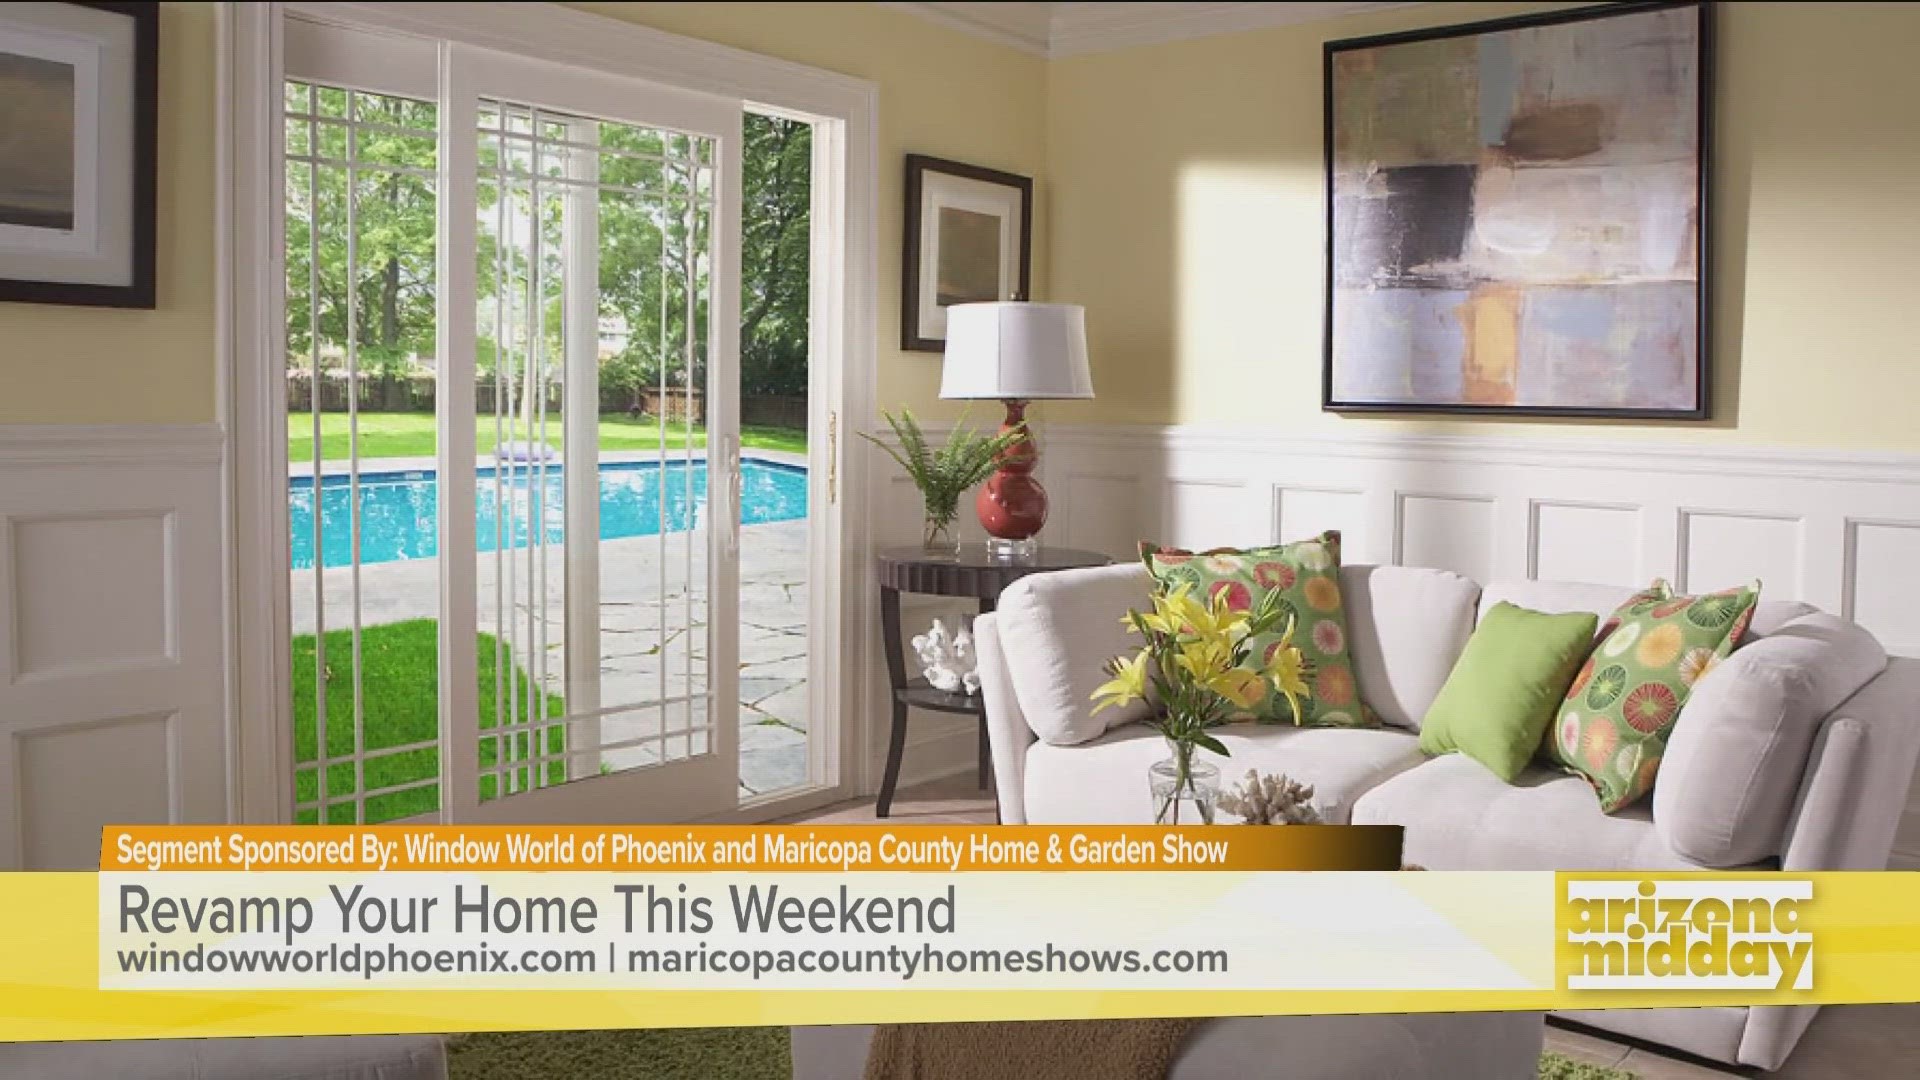 Sponsored Revamp your home with the help of the Maricopa County Home